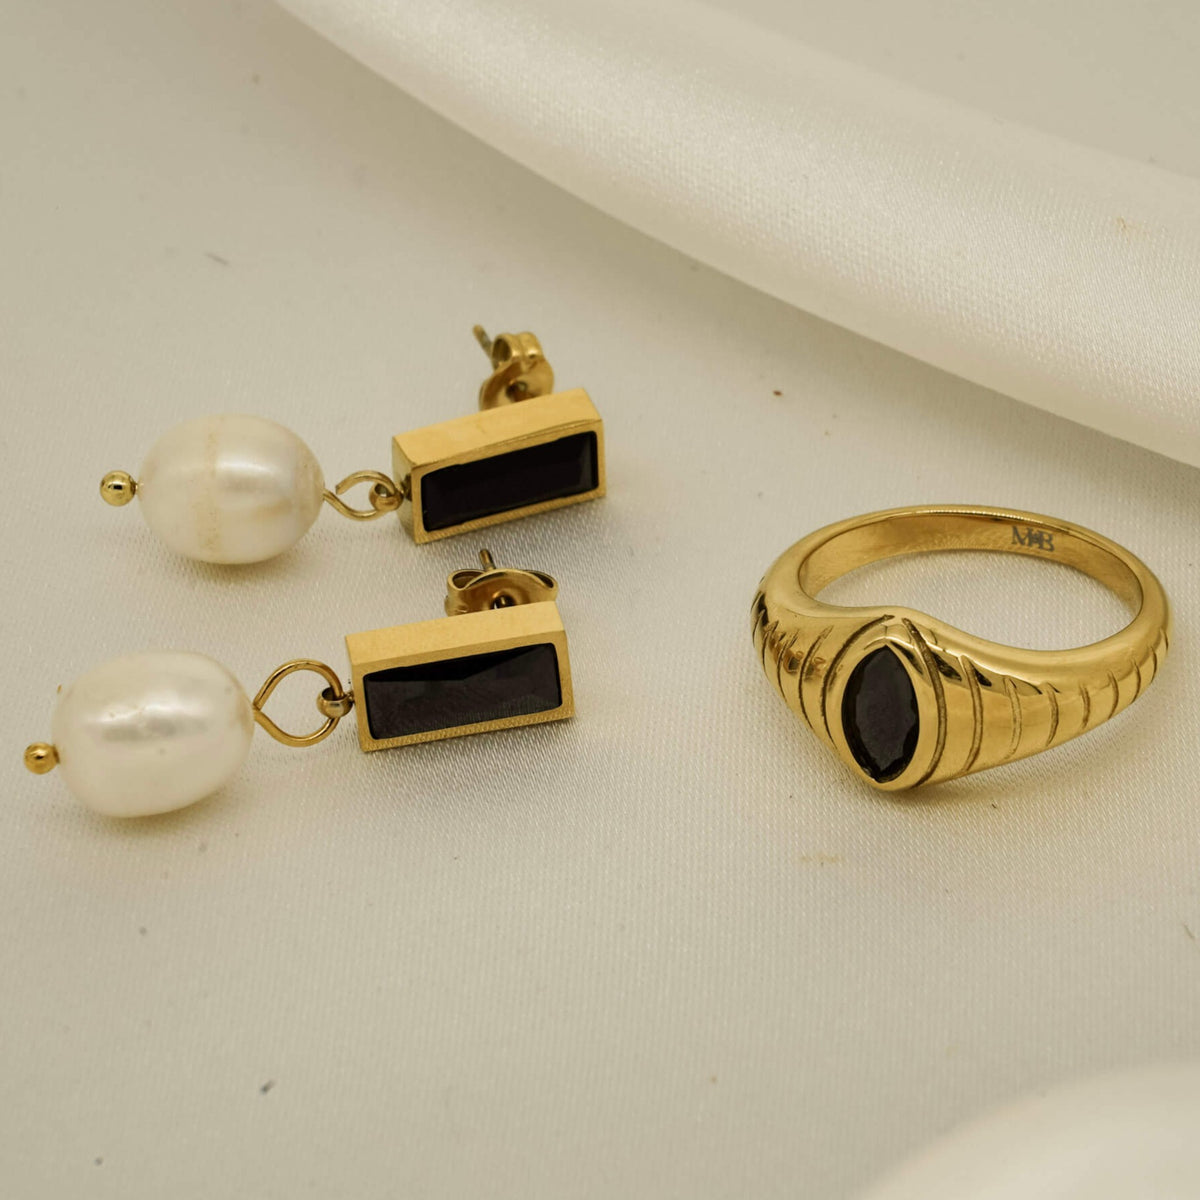 gold ring with black onyx stone which resembles a snakes eye. 